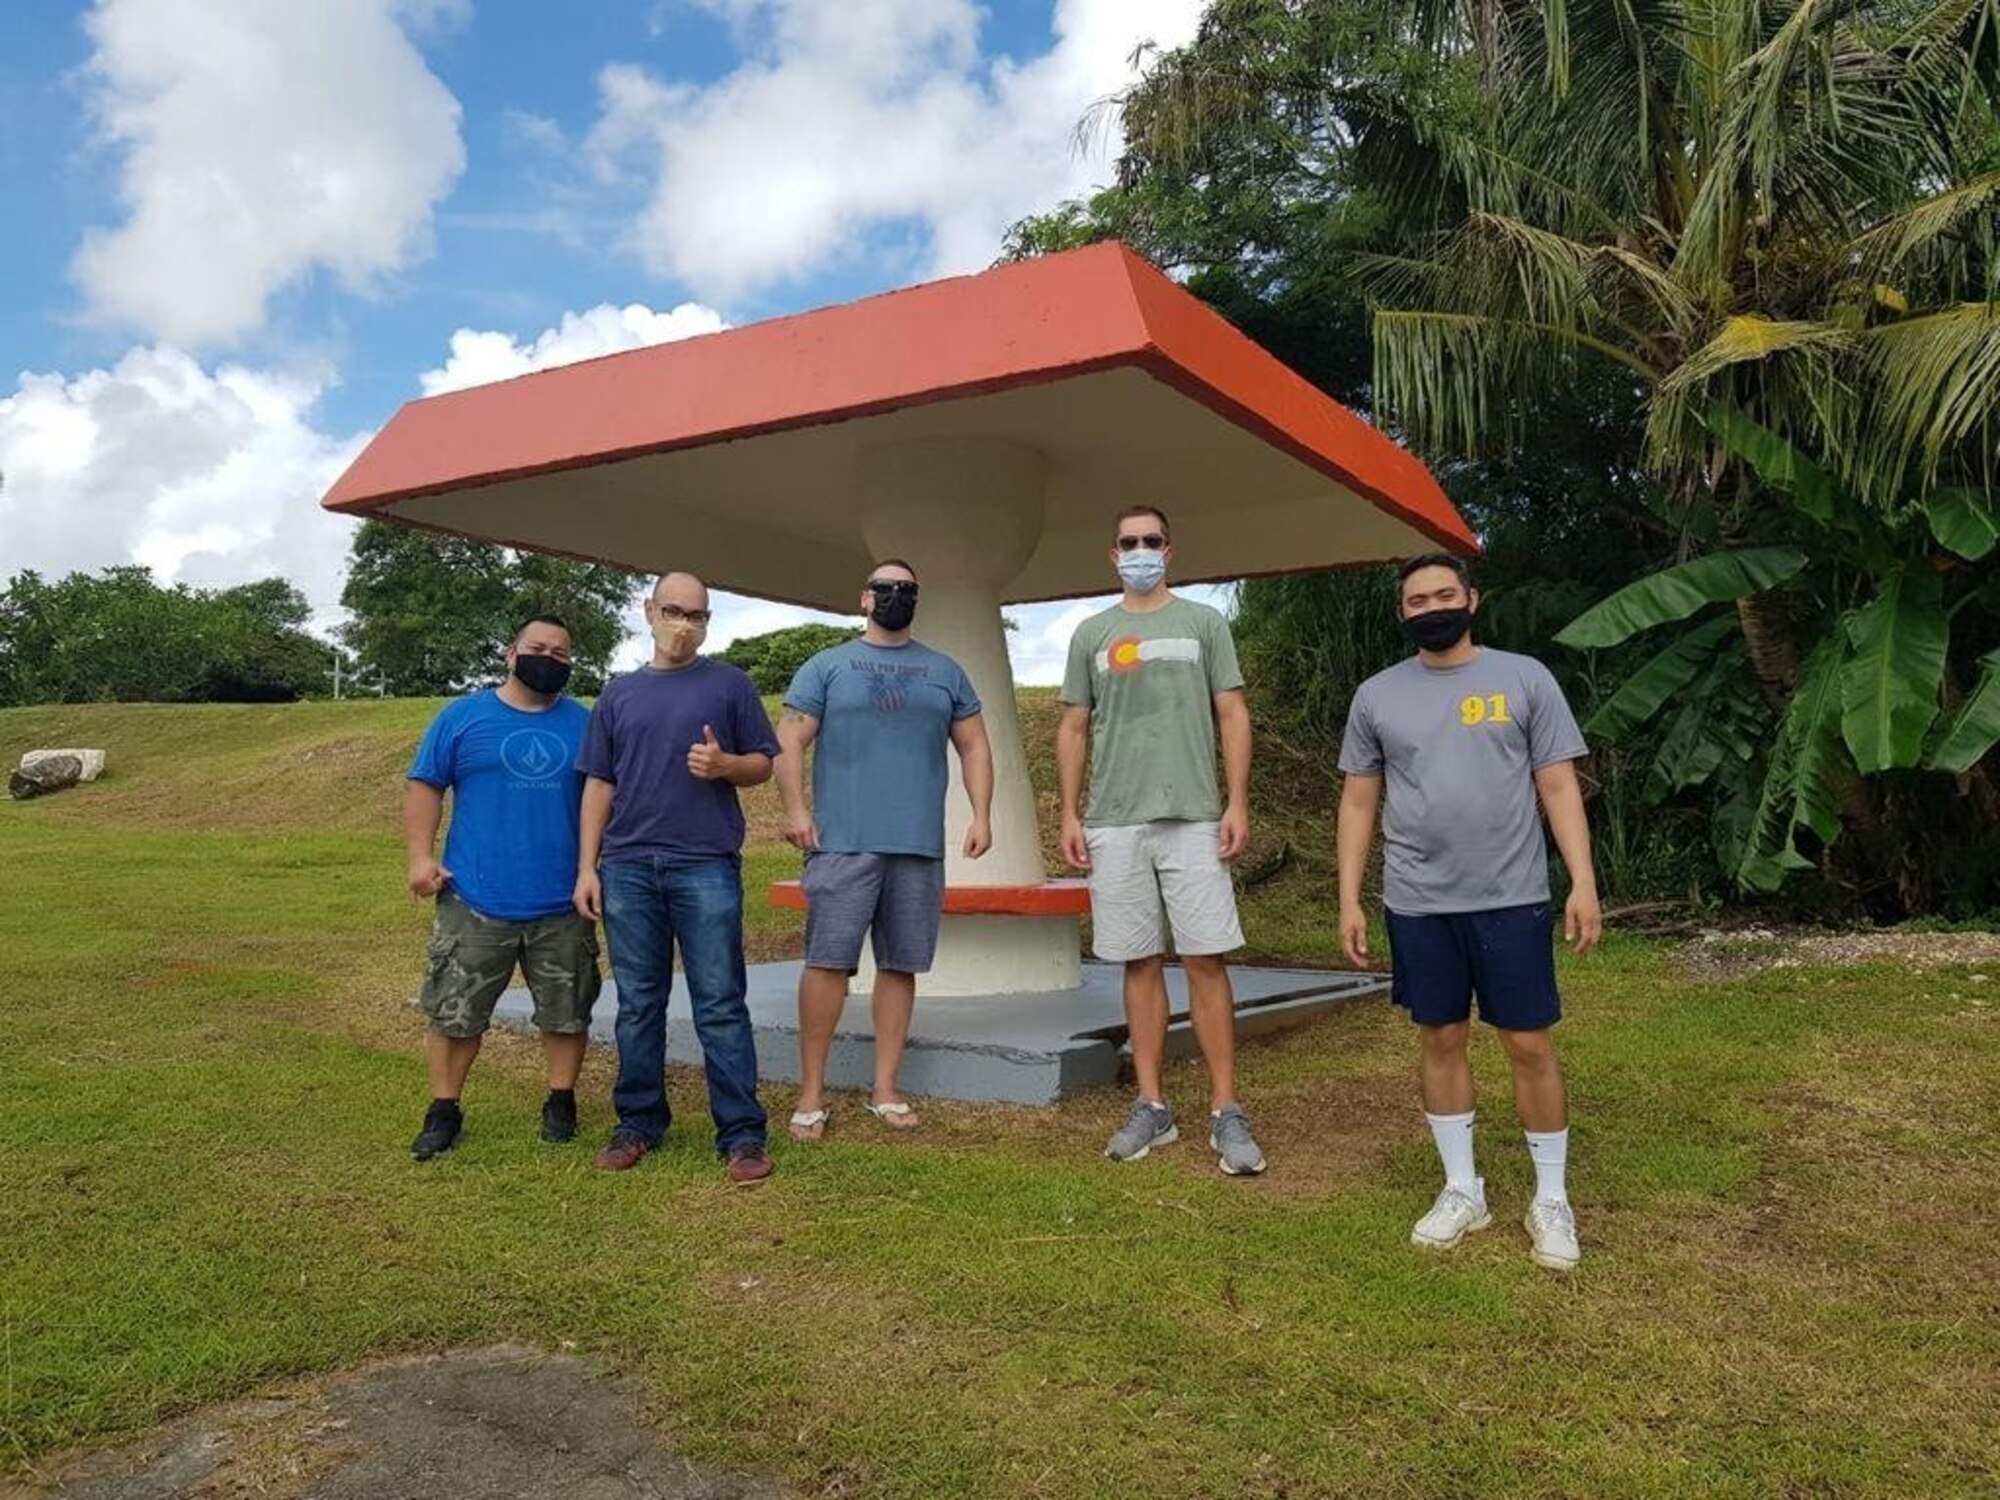 Members from 36th Contracting Squadron volunteer with their partnering village at conduct a beautification project at Pedro Santos Park, Piti, Guam, August 7, 2021. This community outreach event was organized through the Andersen Air Force Base Sister Village Sister Squadron program, in which squadron volunteers collaborate with Guam residents during events to strengthen their friendship and partnership. (Courtesy photo)